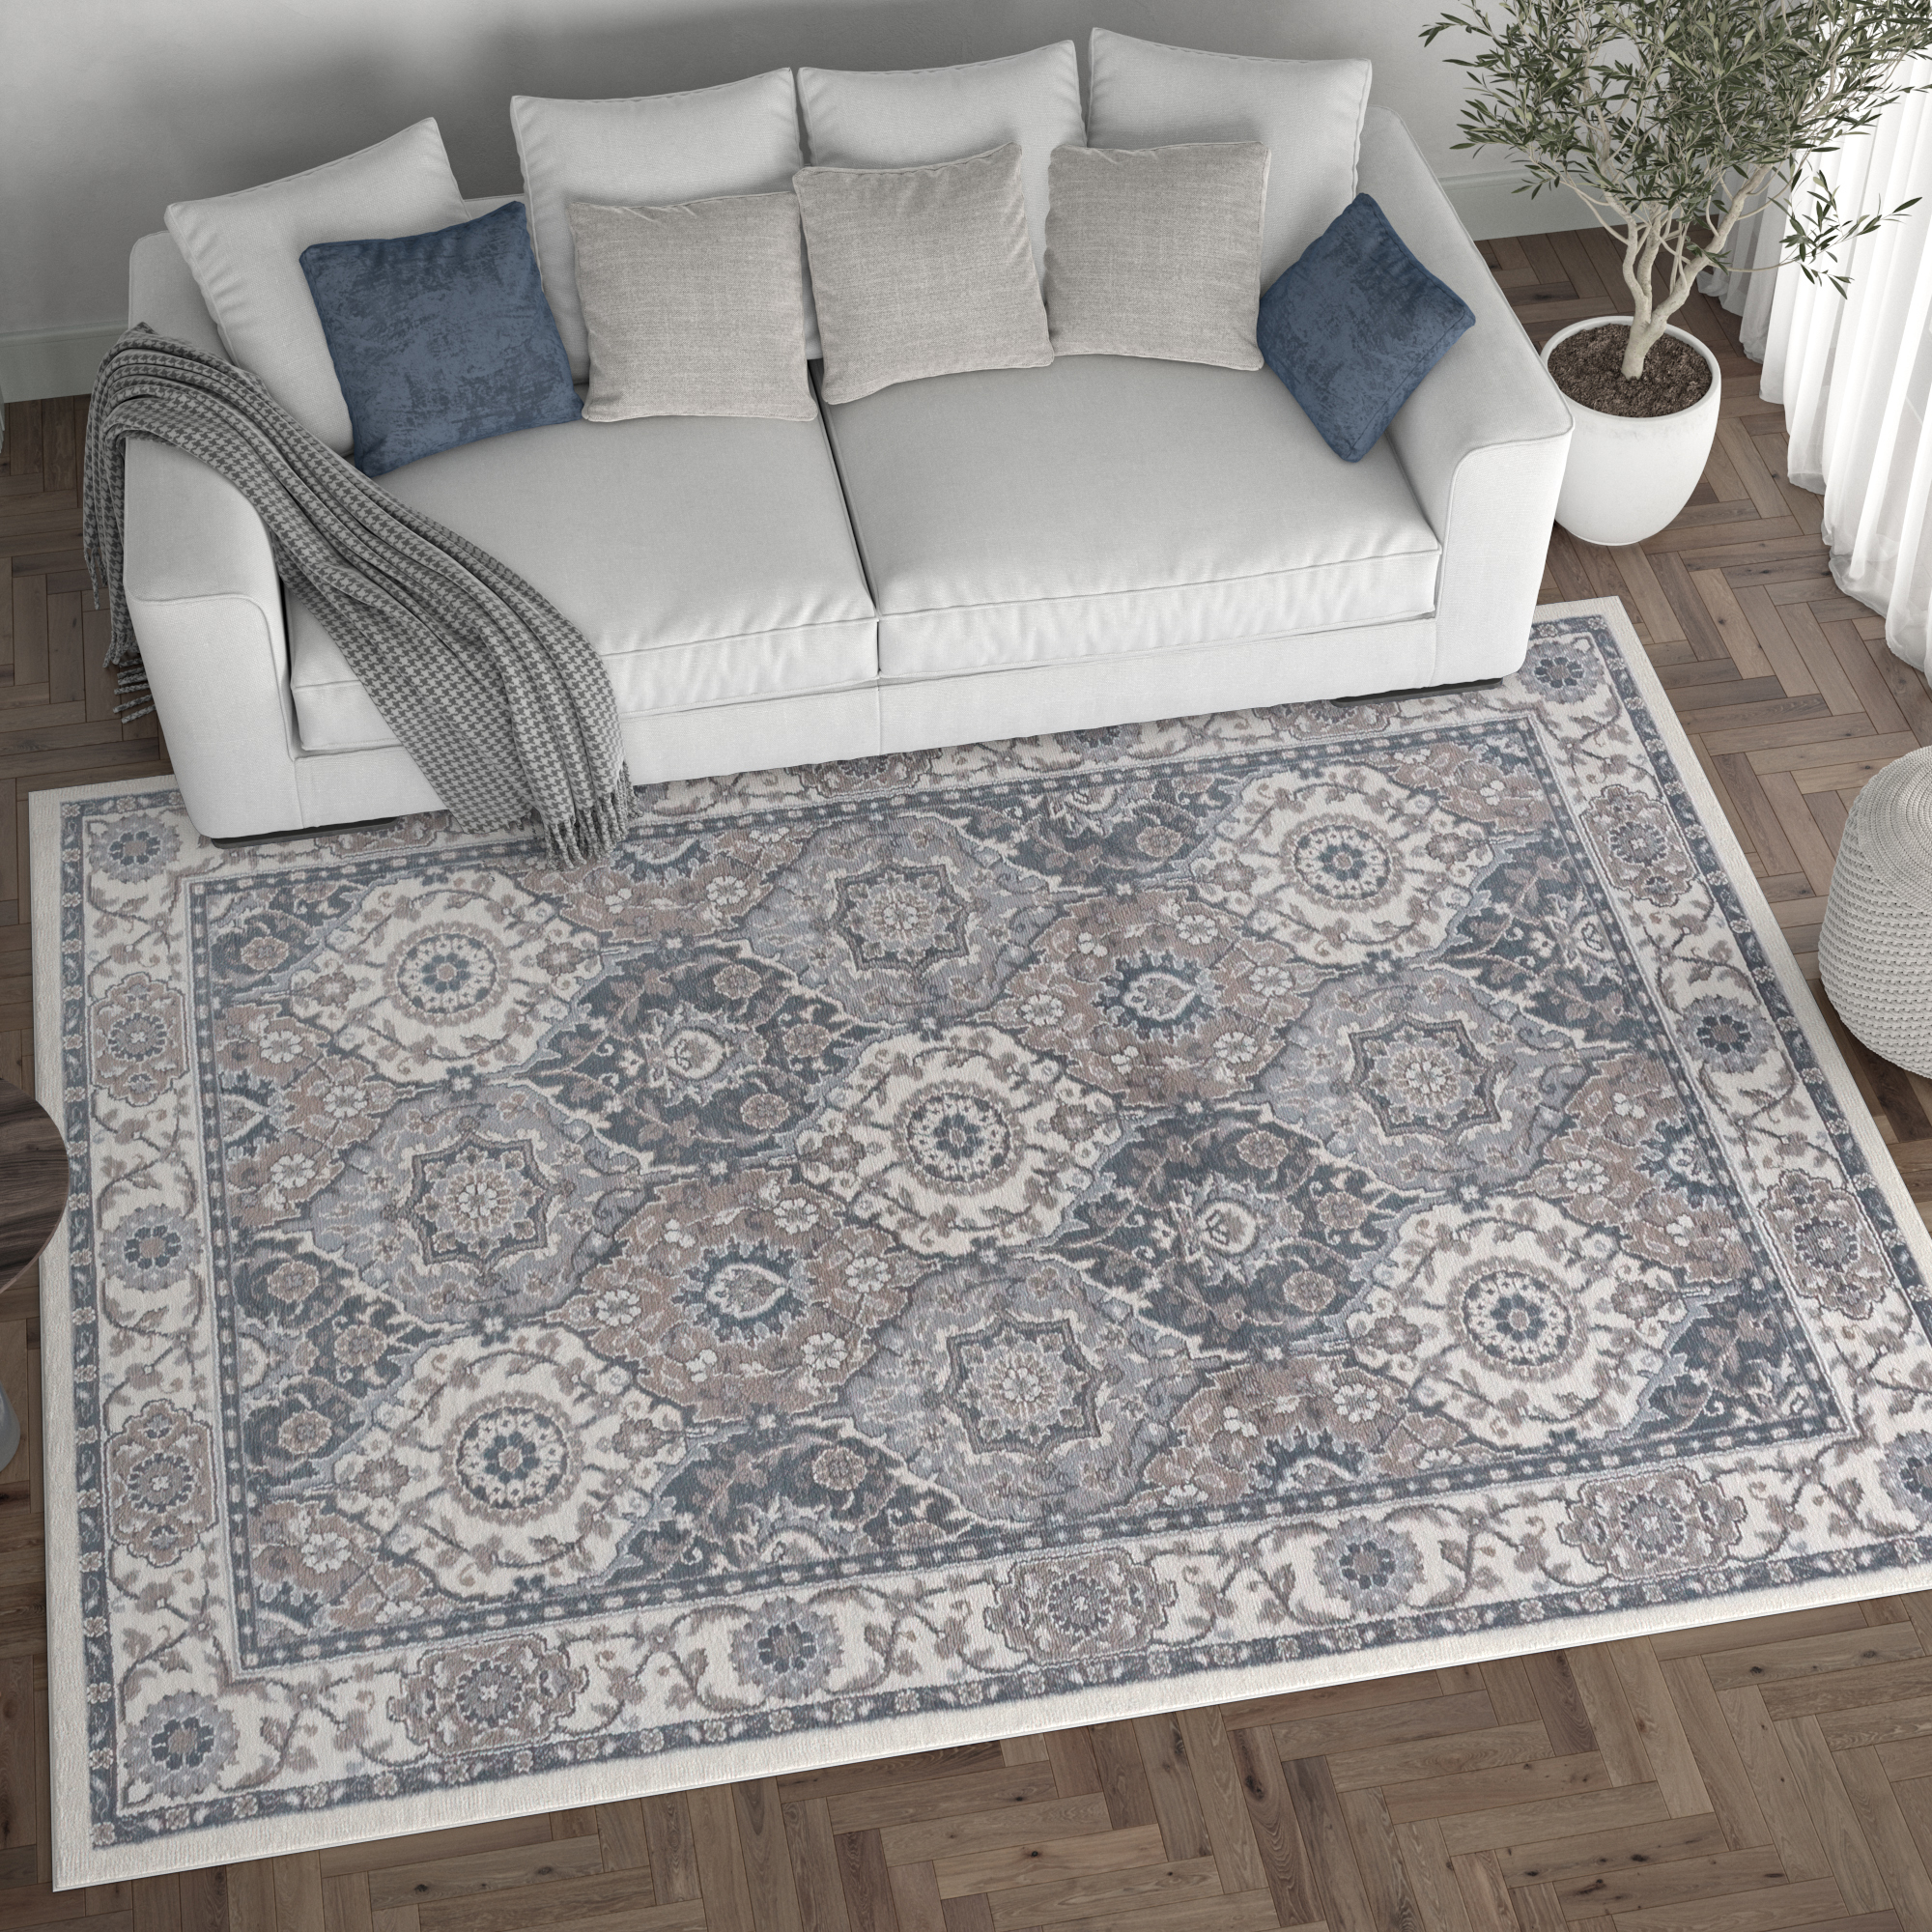 Tayse Rugs Newcomb Traditional Oriental Cream Runner Rug